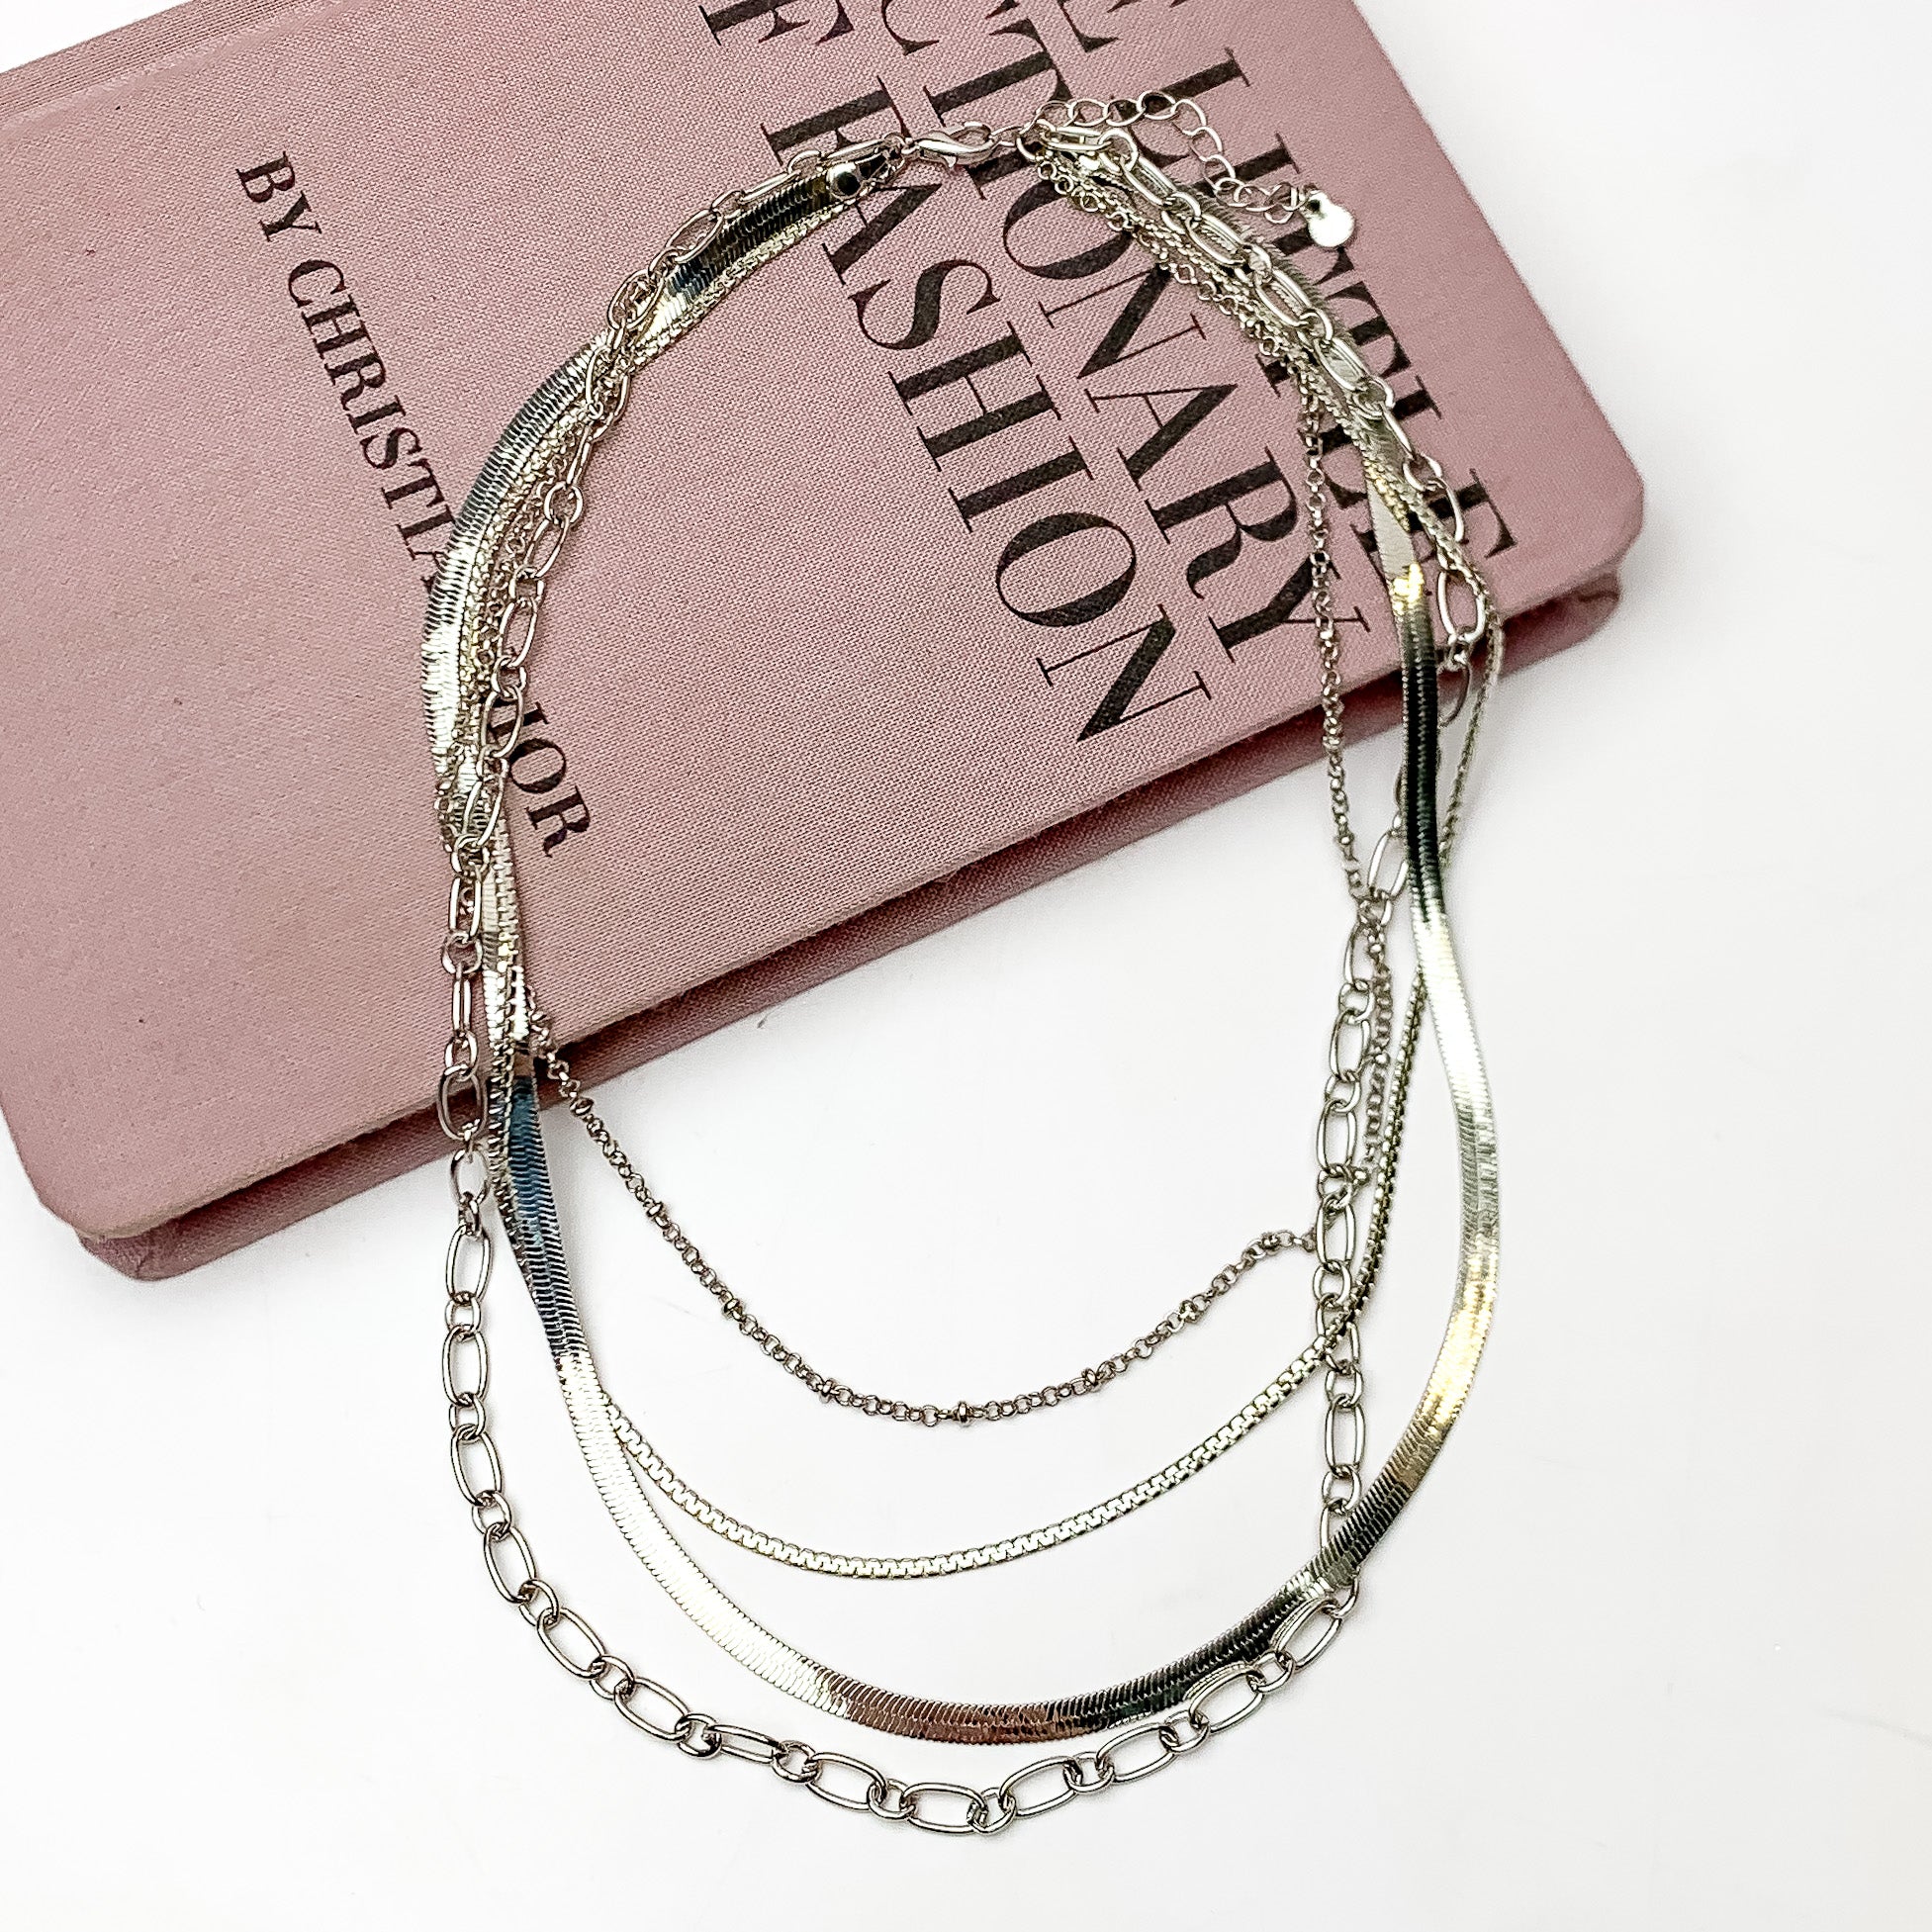 New to Town Multi Strand Chain Necklace in Silver Tone - Giddy Up Glamour Boutique